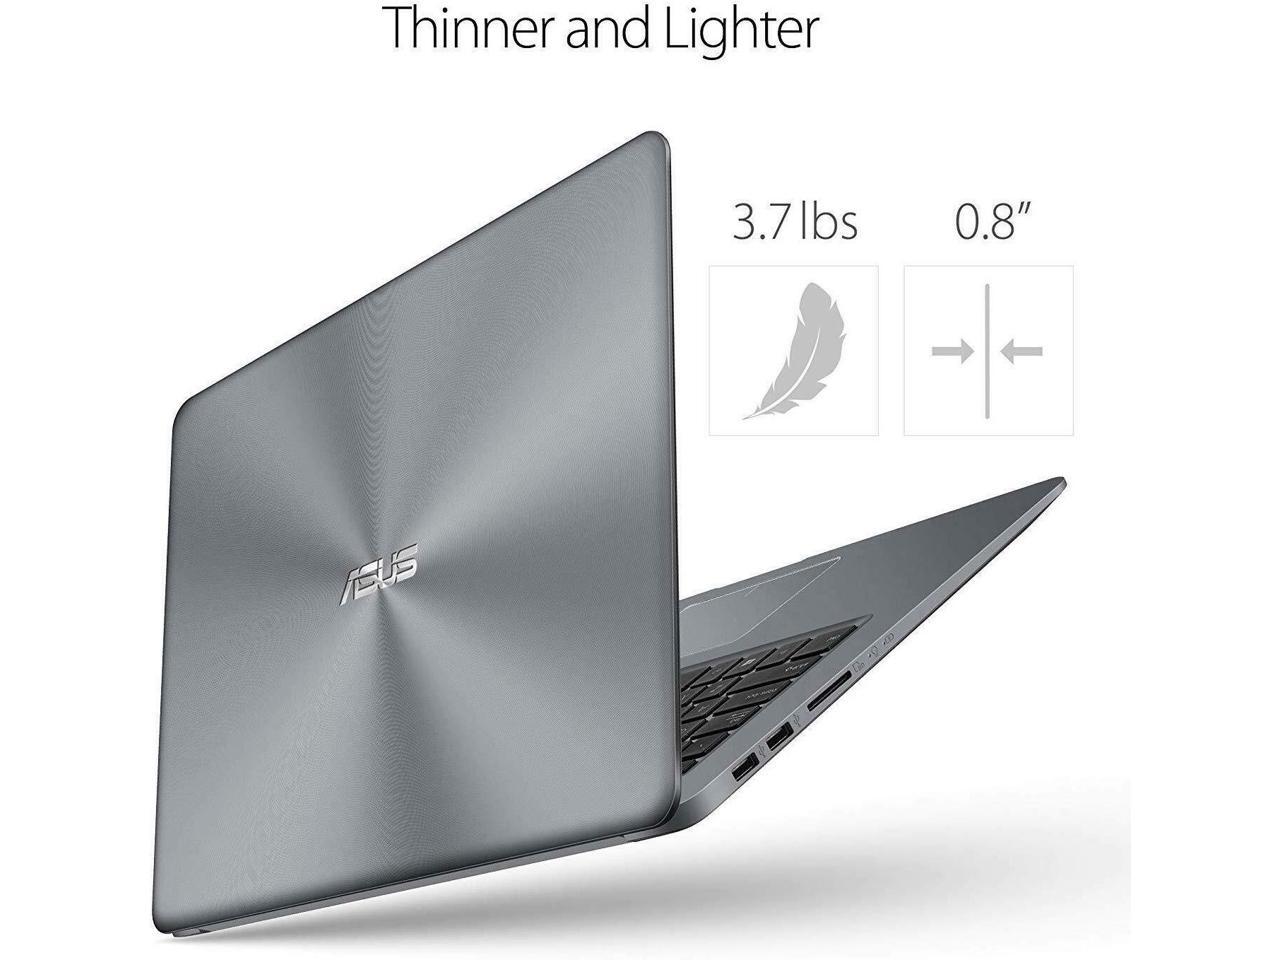 Newest Asus VivoBook Thin & Lightweight Laptop (12G DDR4/128G SSD)|15.6" Full HD(1920x1080) WideView display| AMD Quad Core A12-9720P Processor| Wi-Fi AC|Fingerprint Reader|HDMI |Windows 10 in S Mode